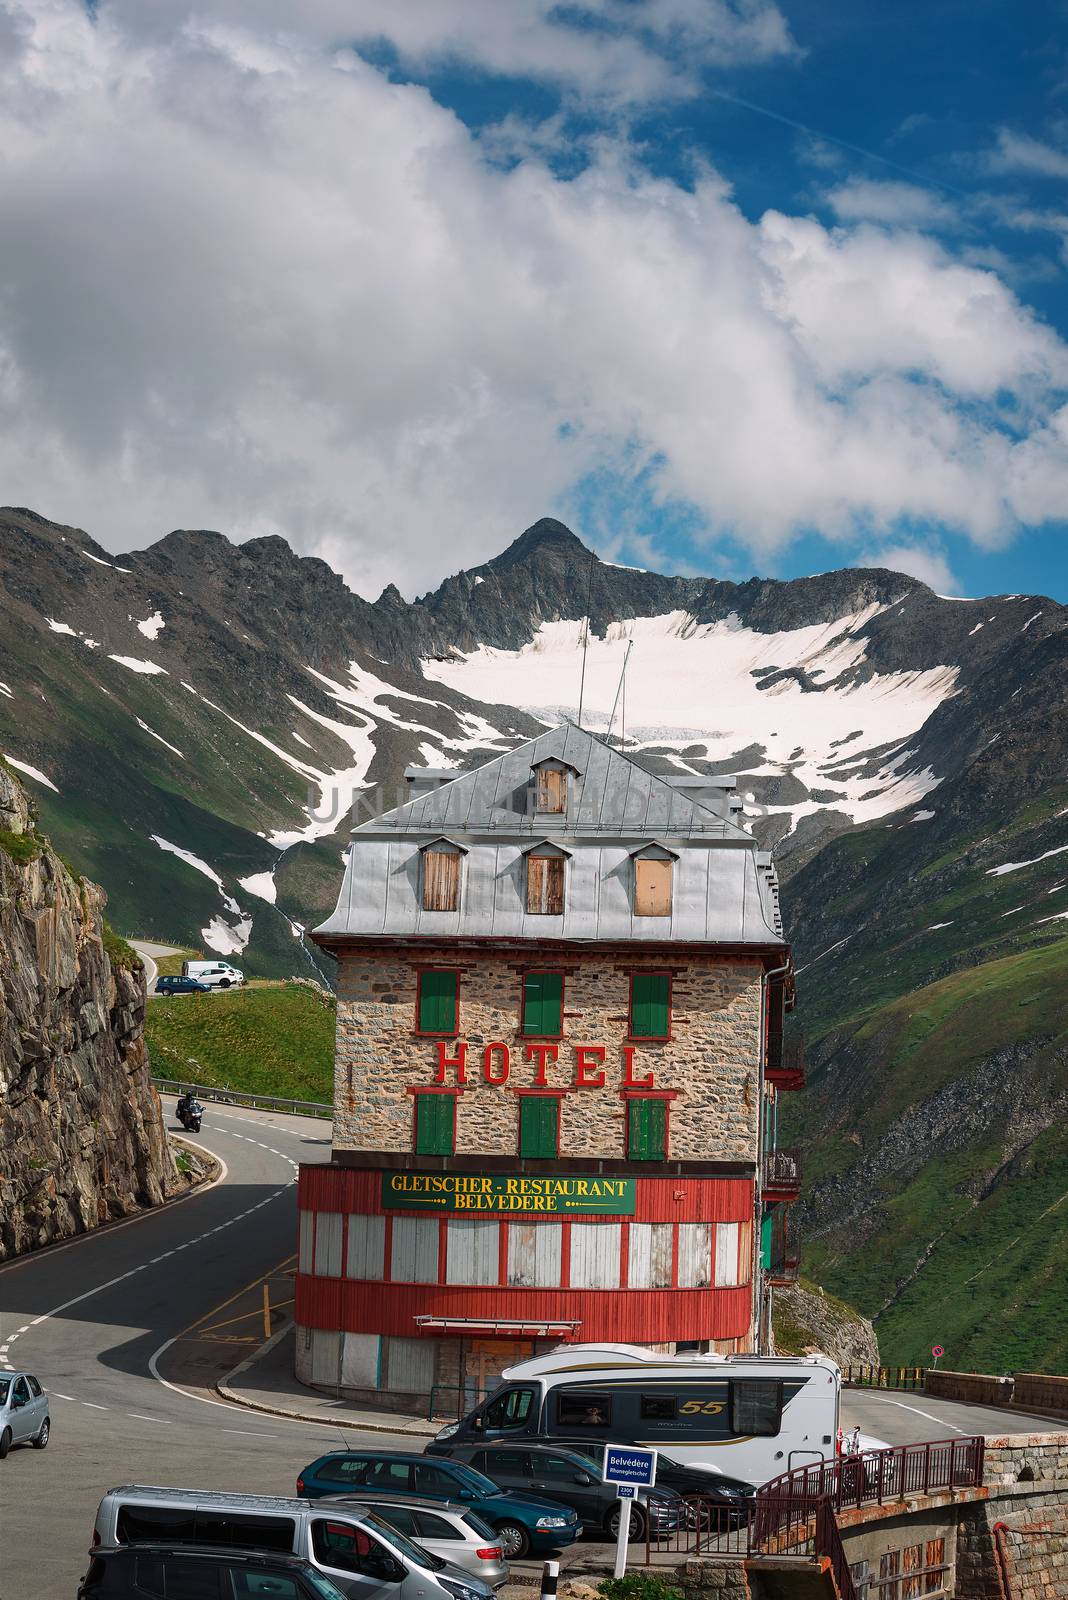 Furka Pass, Switzerland - July 21, 2019 : An old and closed mountain hotel Belvedere located near the Rhone Glacier at the Furka Pass.